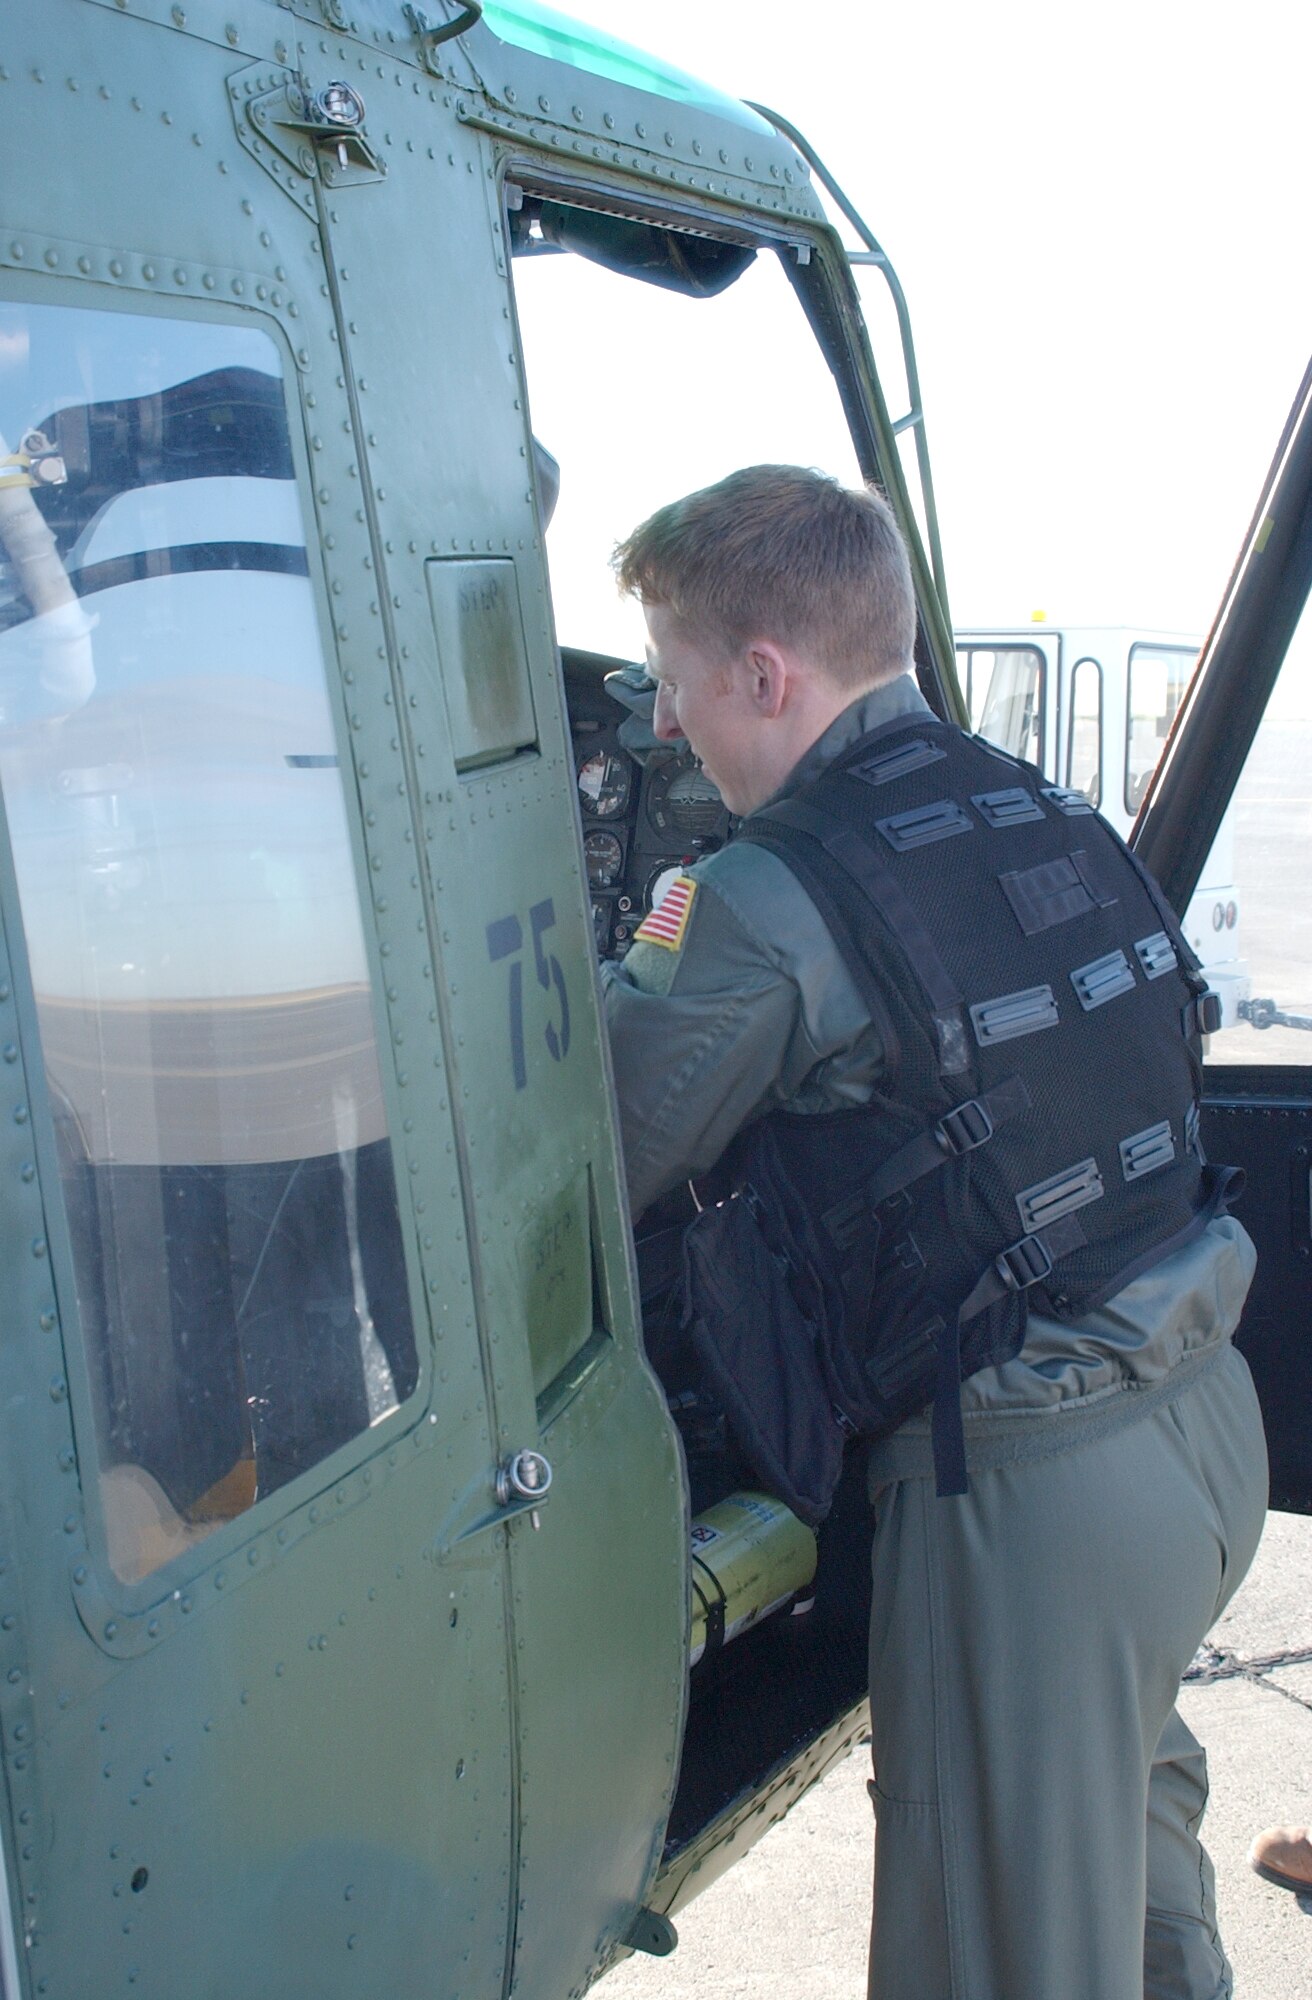 Capt. Marc Milligan, 40th Helicopter Squadron pilot, makes some minor adjustments to the seat of the UH-1N helicopter nbefore getting in.